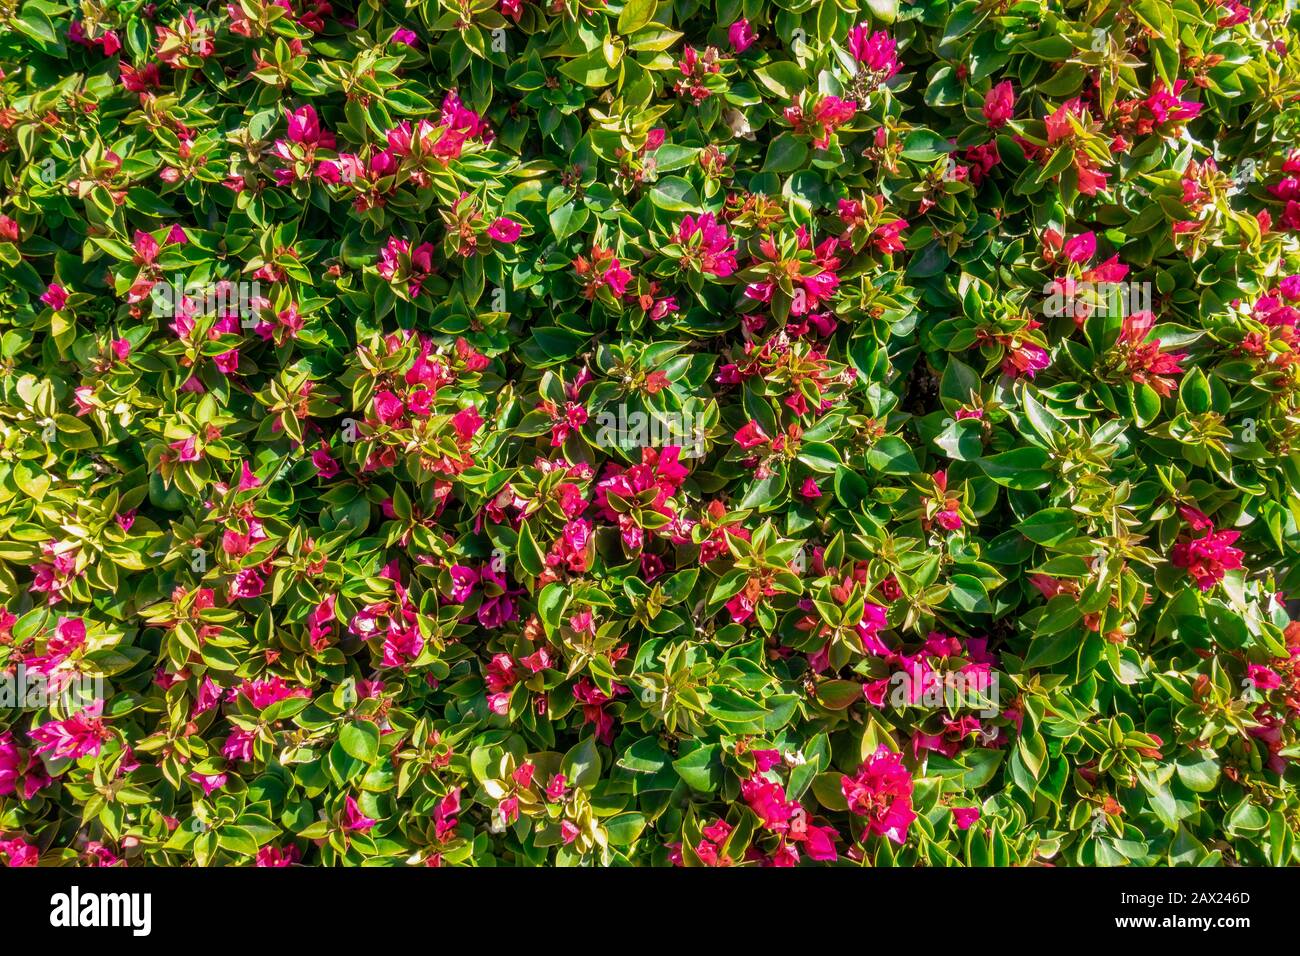 Pink Tropical Bougainvillea Flowers In Bloom And Leaves Background. Purple Lesser Bougainvillea Glabra Bush. Floral Summer Wallpaper. Stock Photo